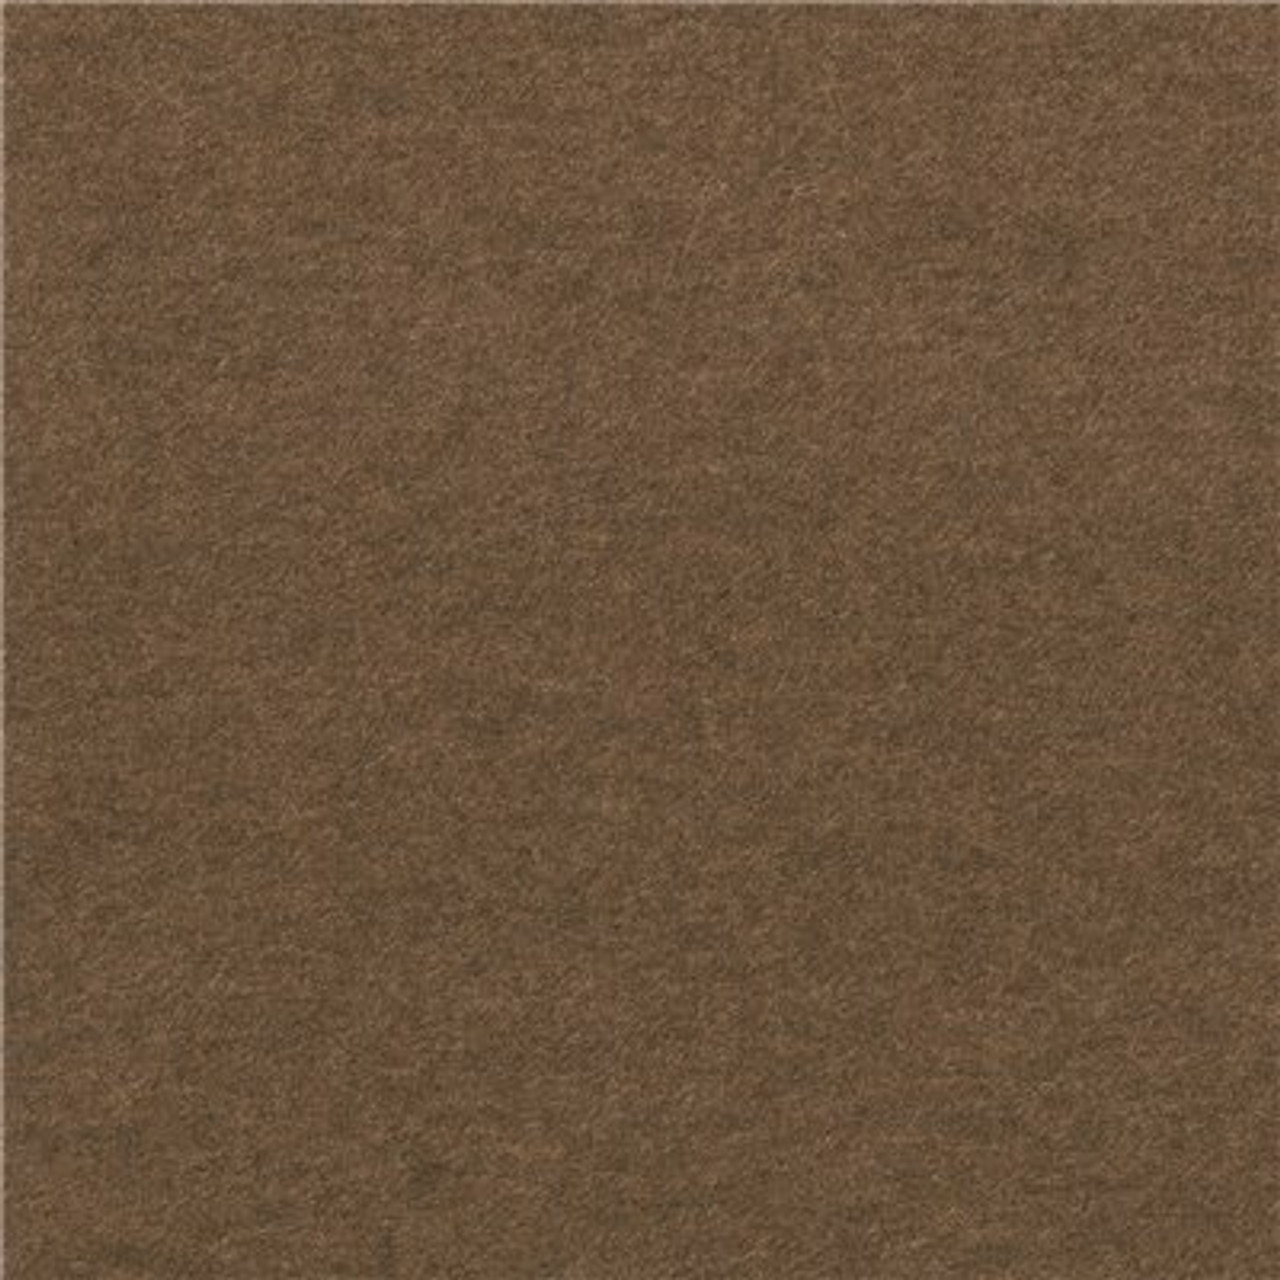 Foss Peel And Stick First Impressions Flat Mocha 24 In. X 24 In. Commercial Carpet Tile (15 Tiles/Case)